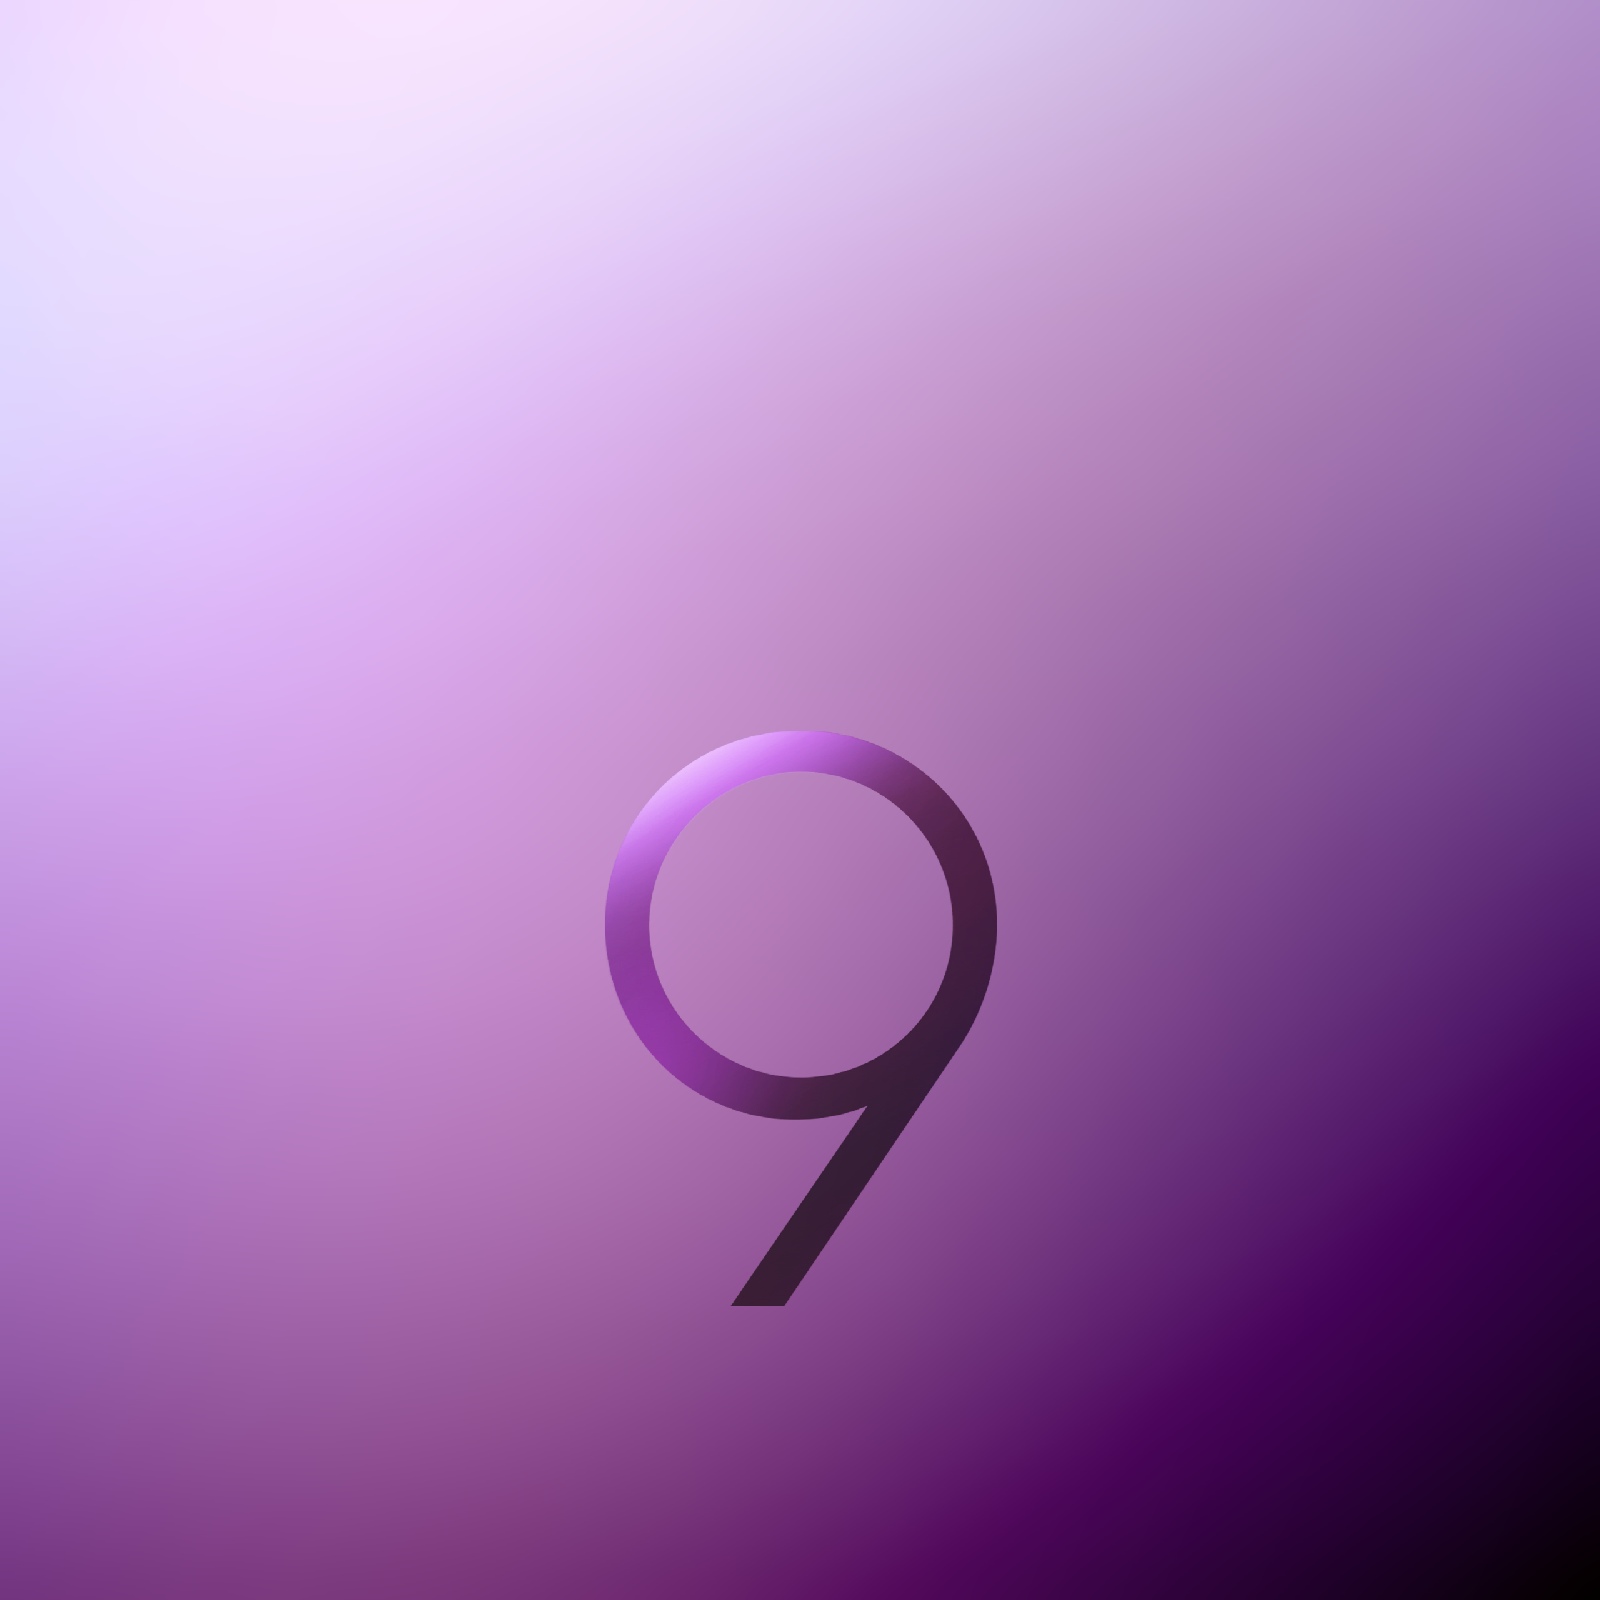 Official Galaxy S9 wallpapers are